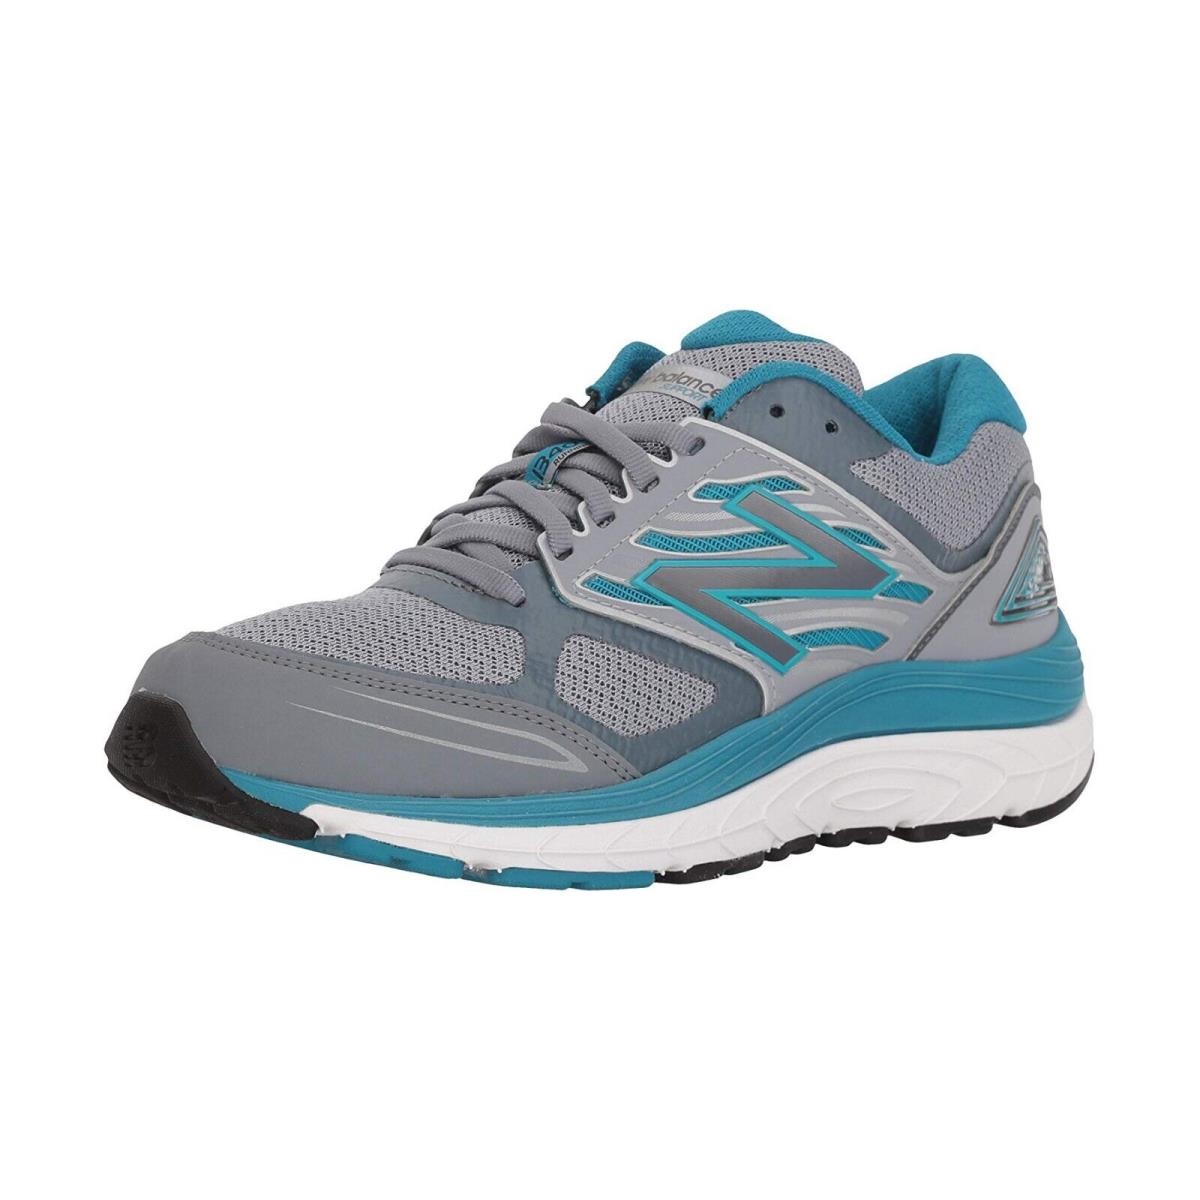 New Balance 1340v3 Women`s Running Shoes Sneakers W1340GB3 - Grey/blue